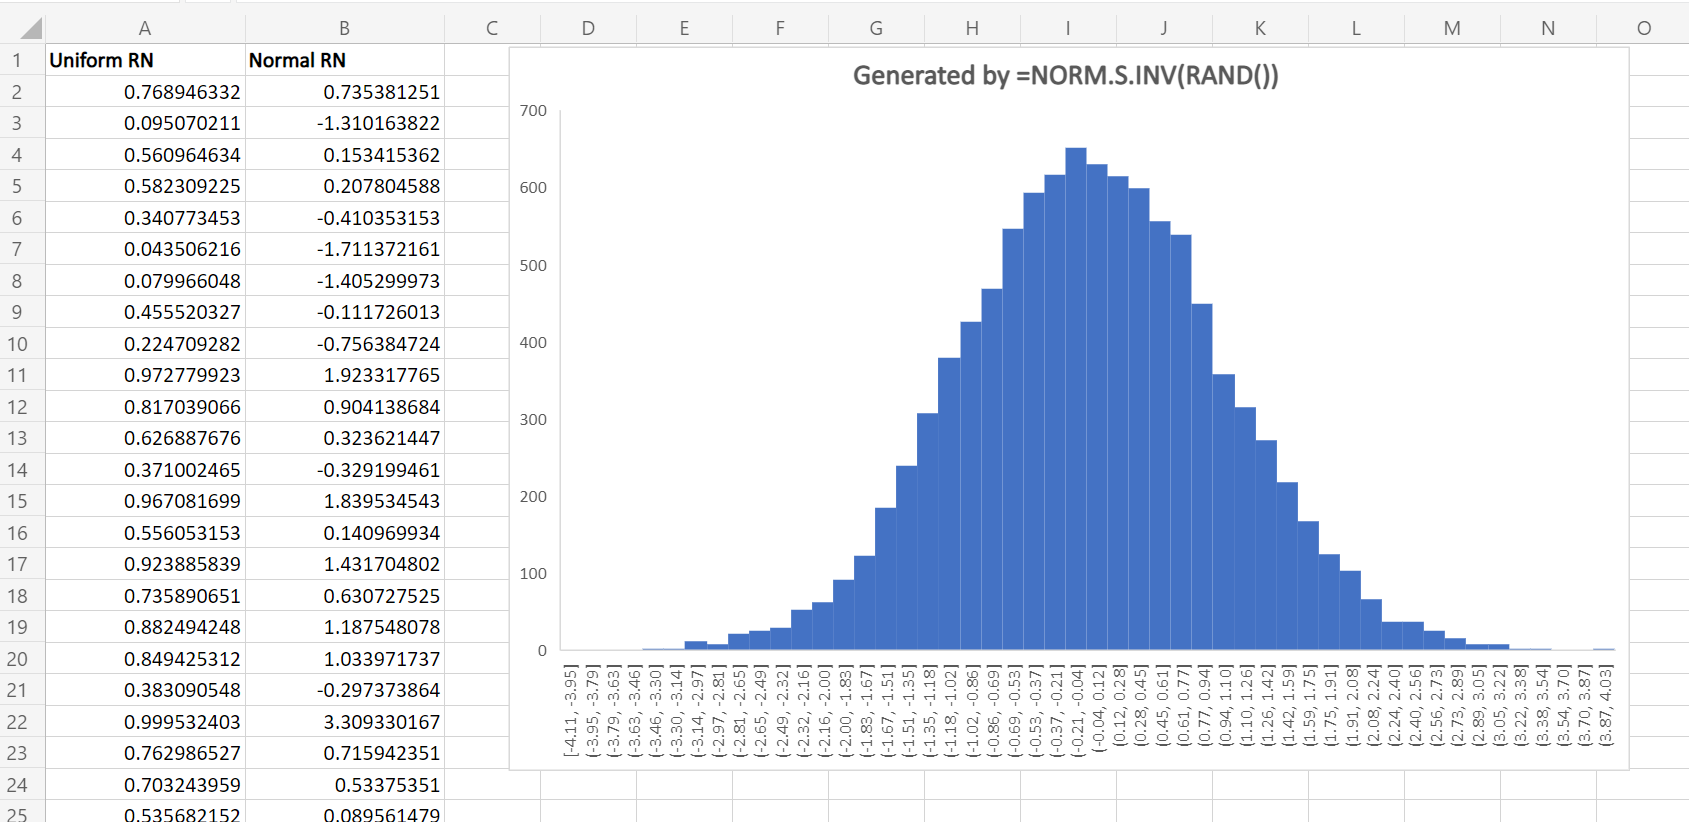 Generate random numbers - a normal distribution generated by Excel showing a good shape that is approximately normal